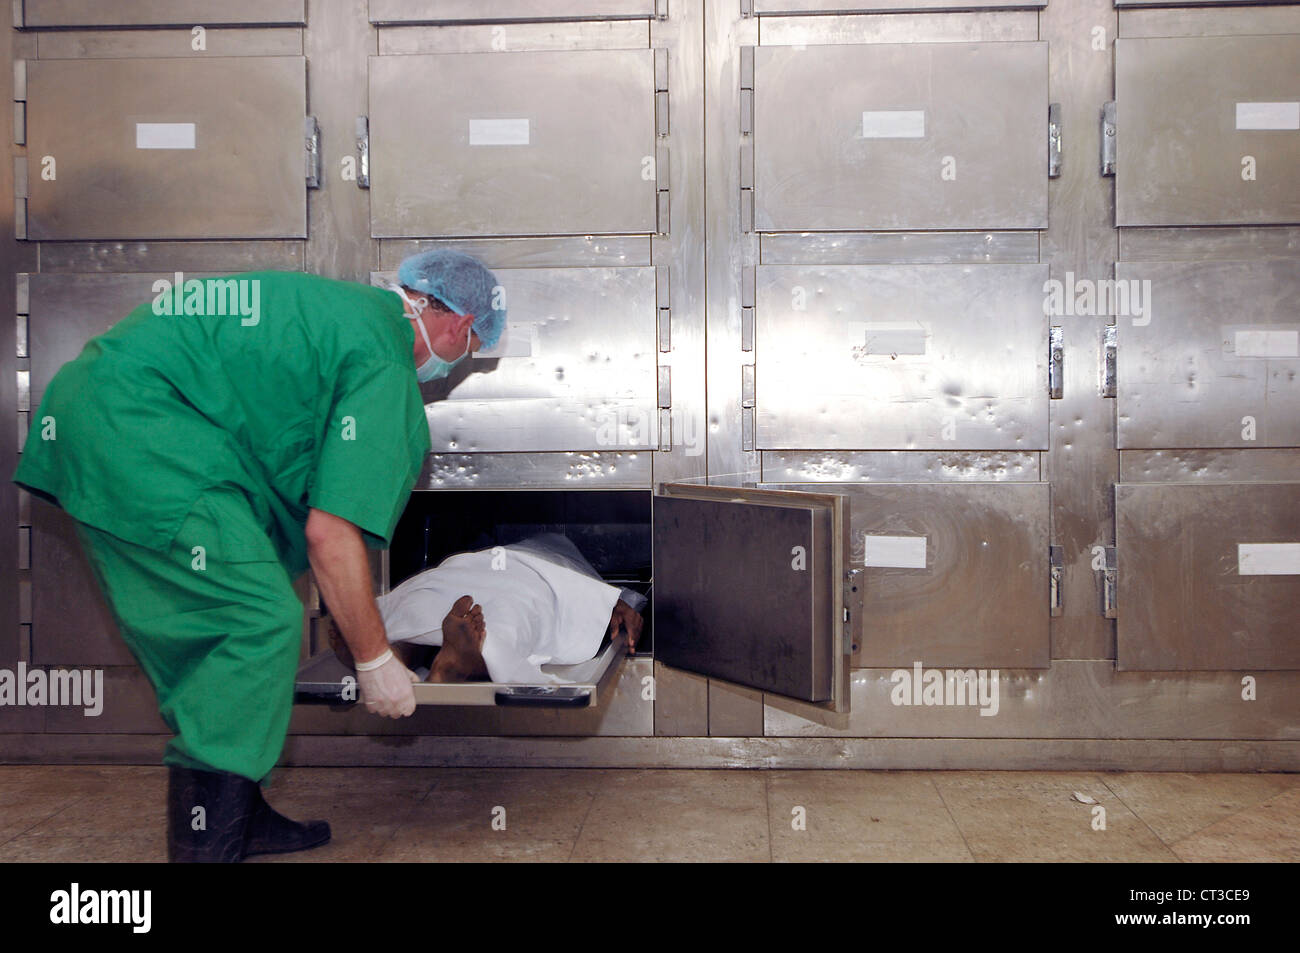 A mortuary technician places a human body in a cold storage facility